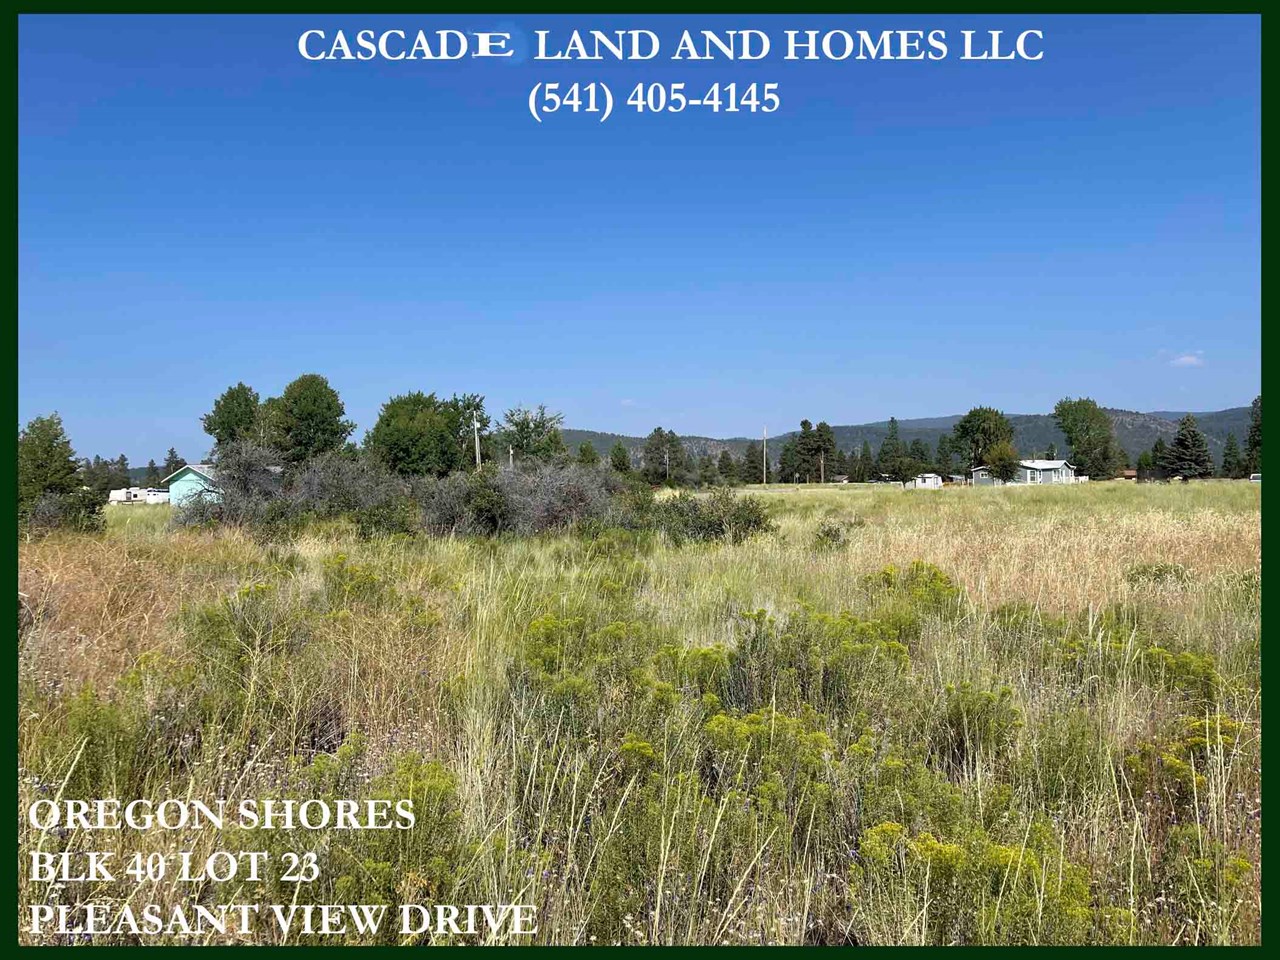 this hilltop parcel would be an excellent spot for a two-story home to maximize the 360-degree views here!